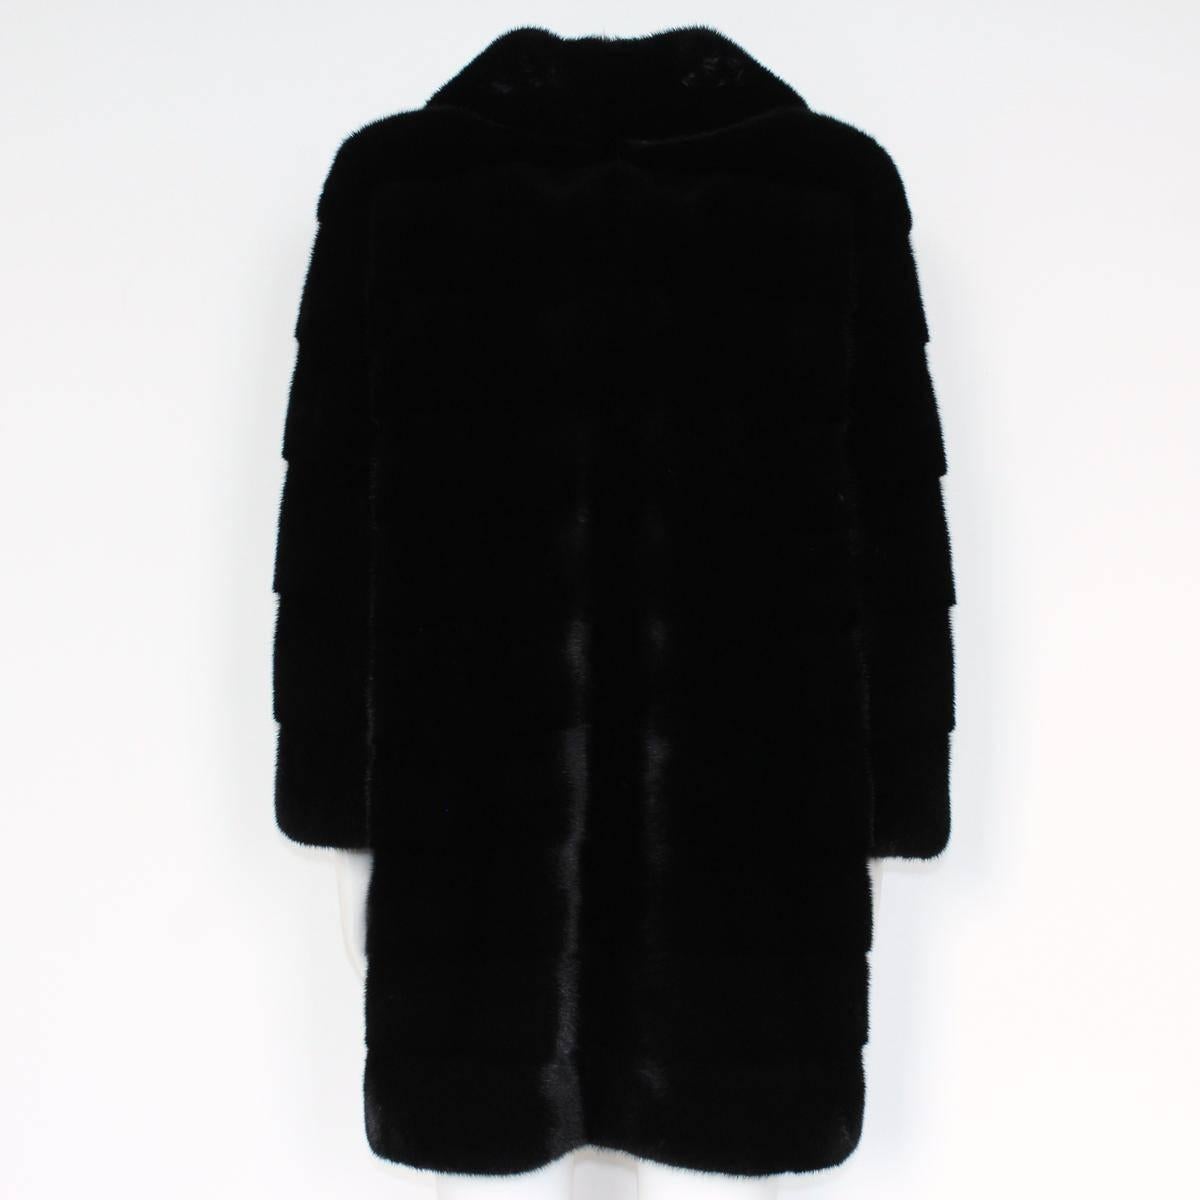 Fantastic Mink fur coat
2017 / 2018 Fall Winter Collection
Feminine mink
Black color
3 Hooks closure
Single button
2 Pockets
3/4 Sleeve
Total length from shoulder cm 80 (31.4 inches)
Size M 
New with tags
Worldwide express shipping included in the